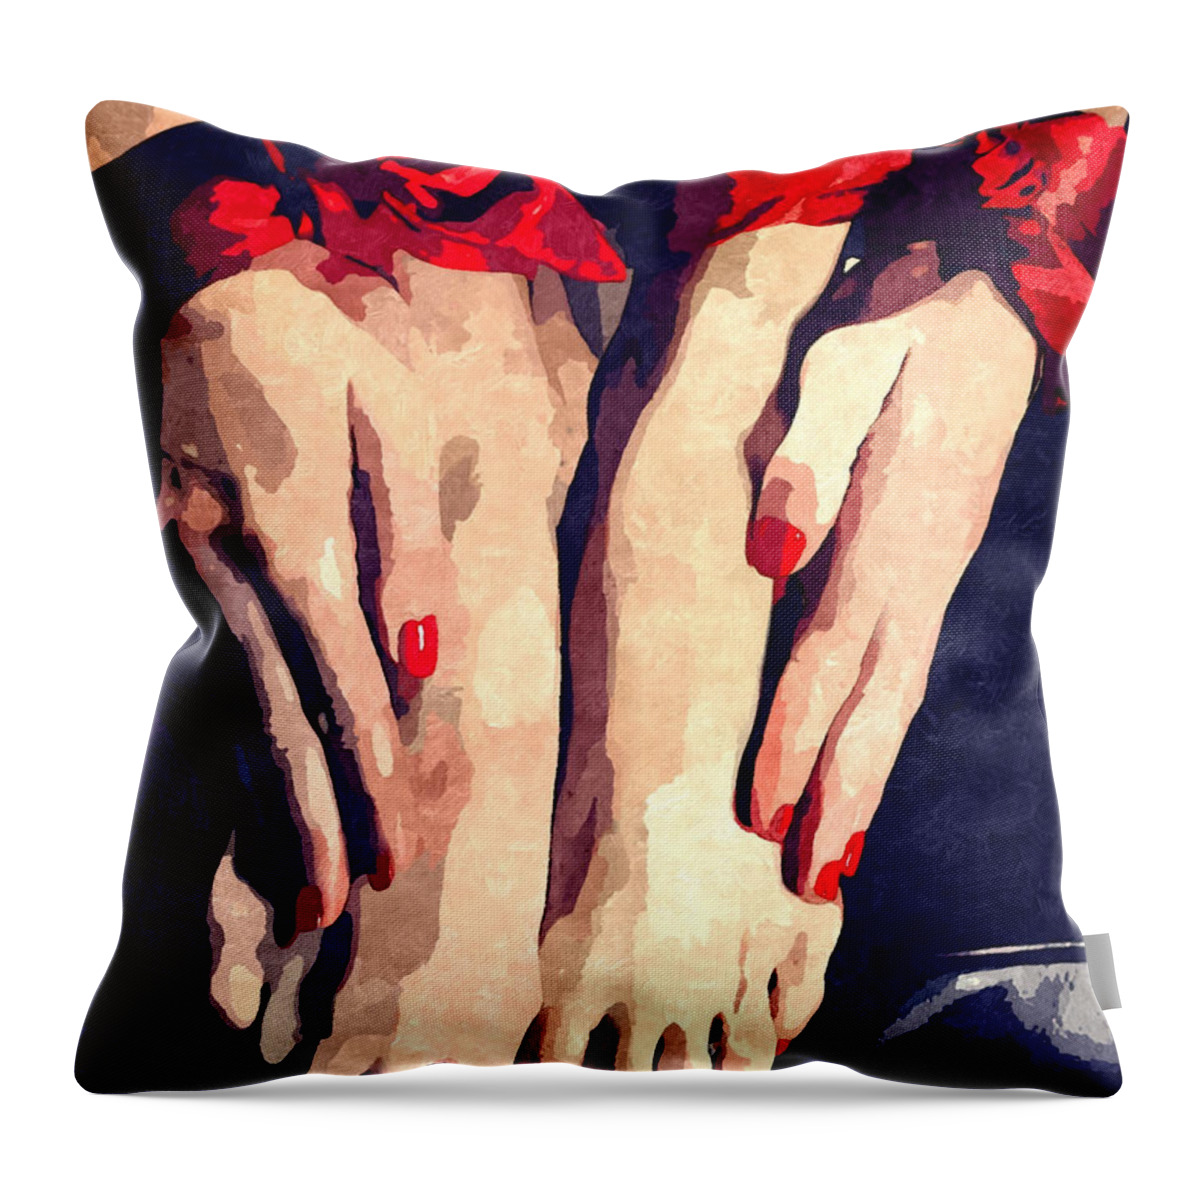 Bdsm Throw Pillow featuring the painting Submission in Red by BDSM love